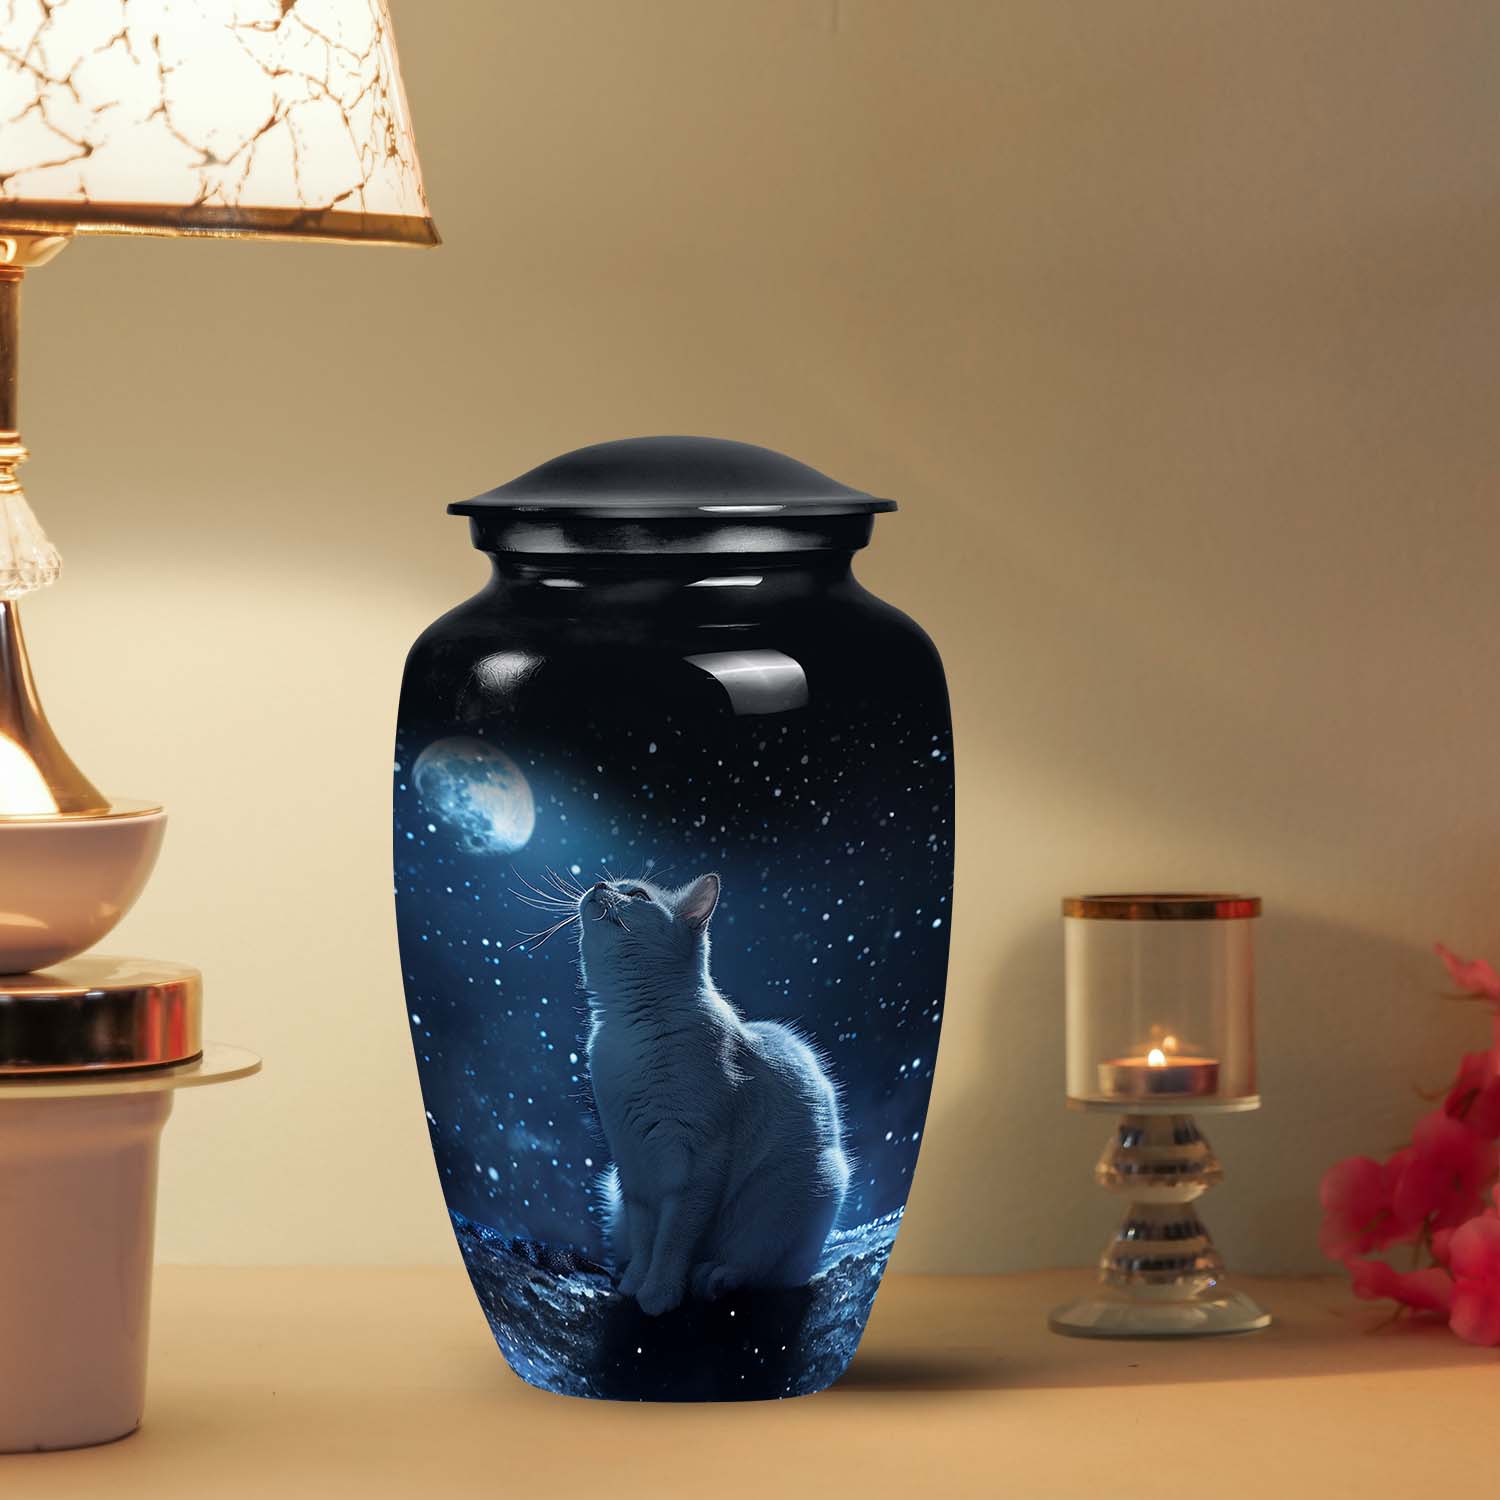 Unique large Cat Urn design inspired by a moon, perfect option for pet ashes.